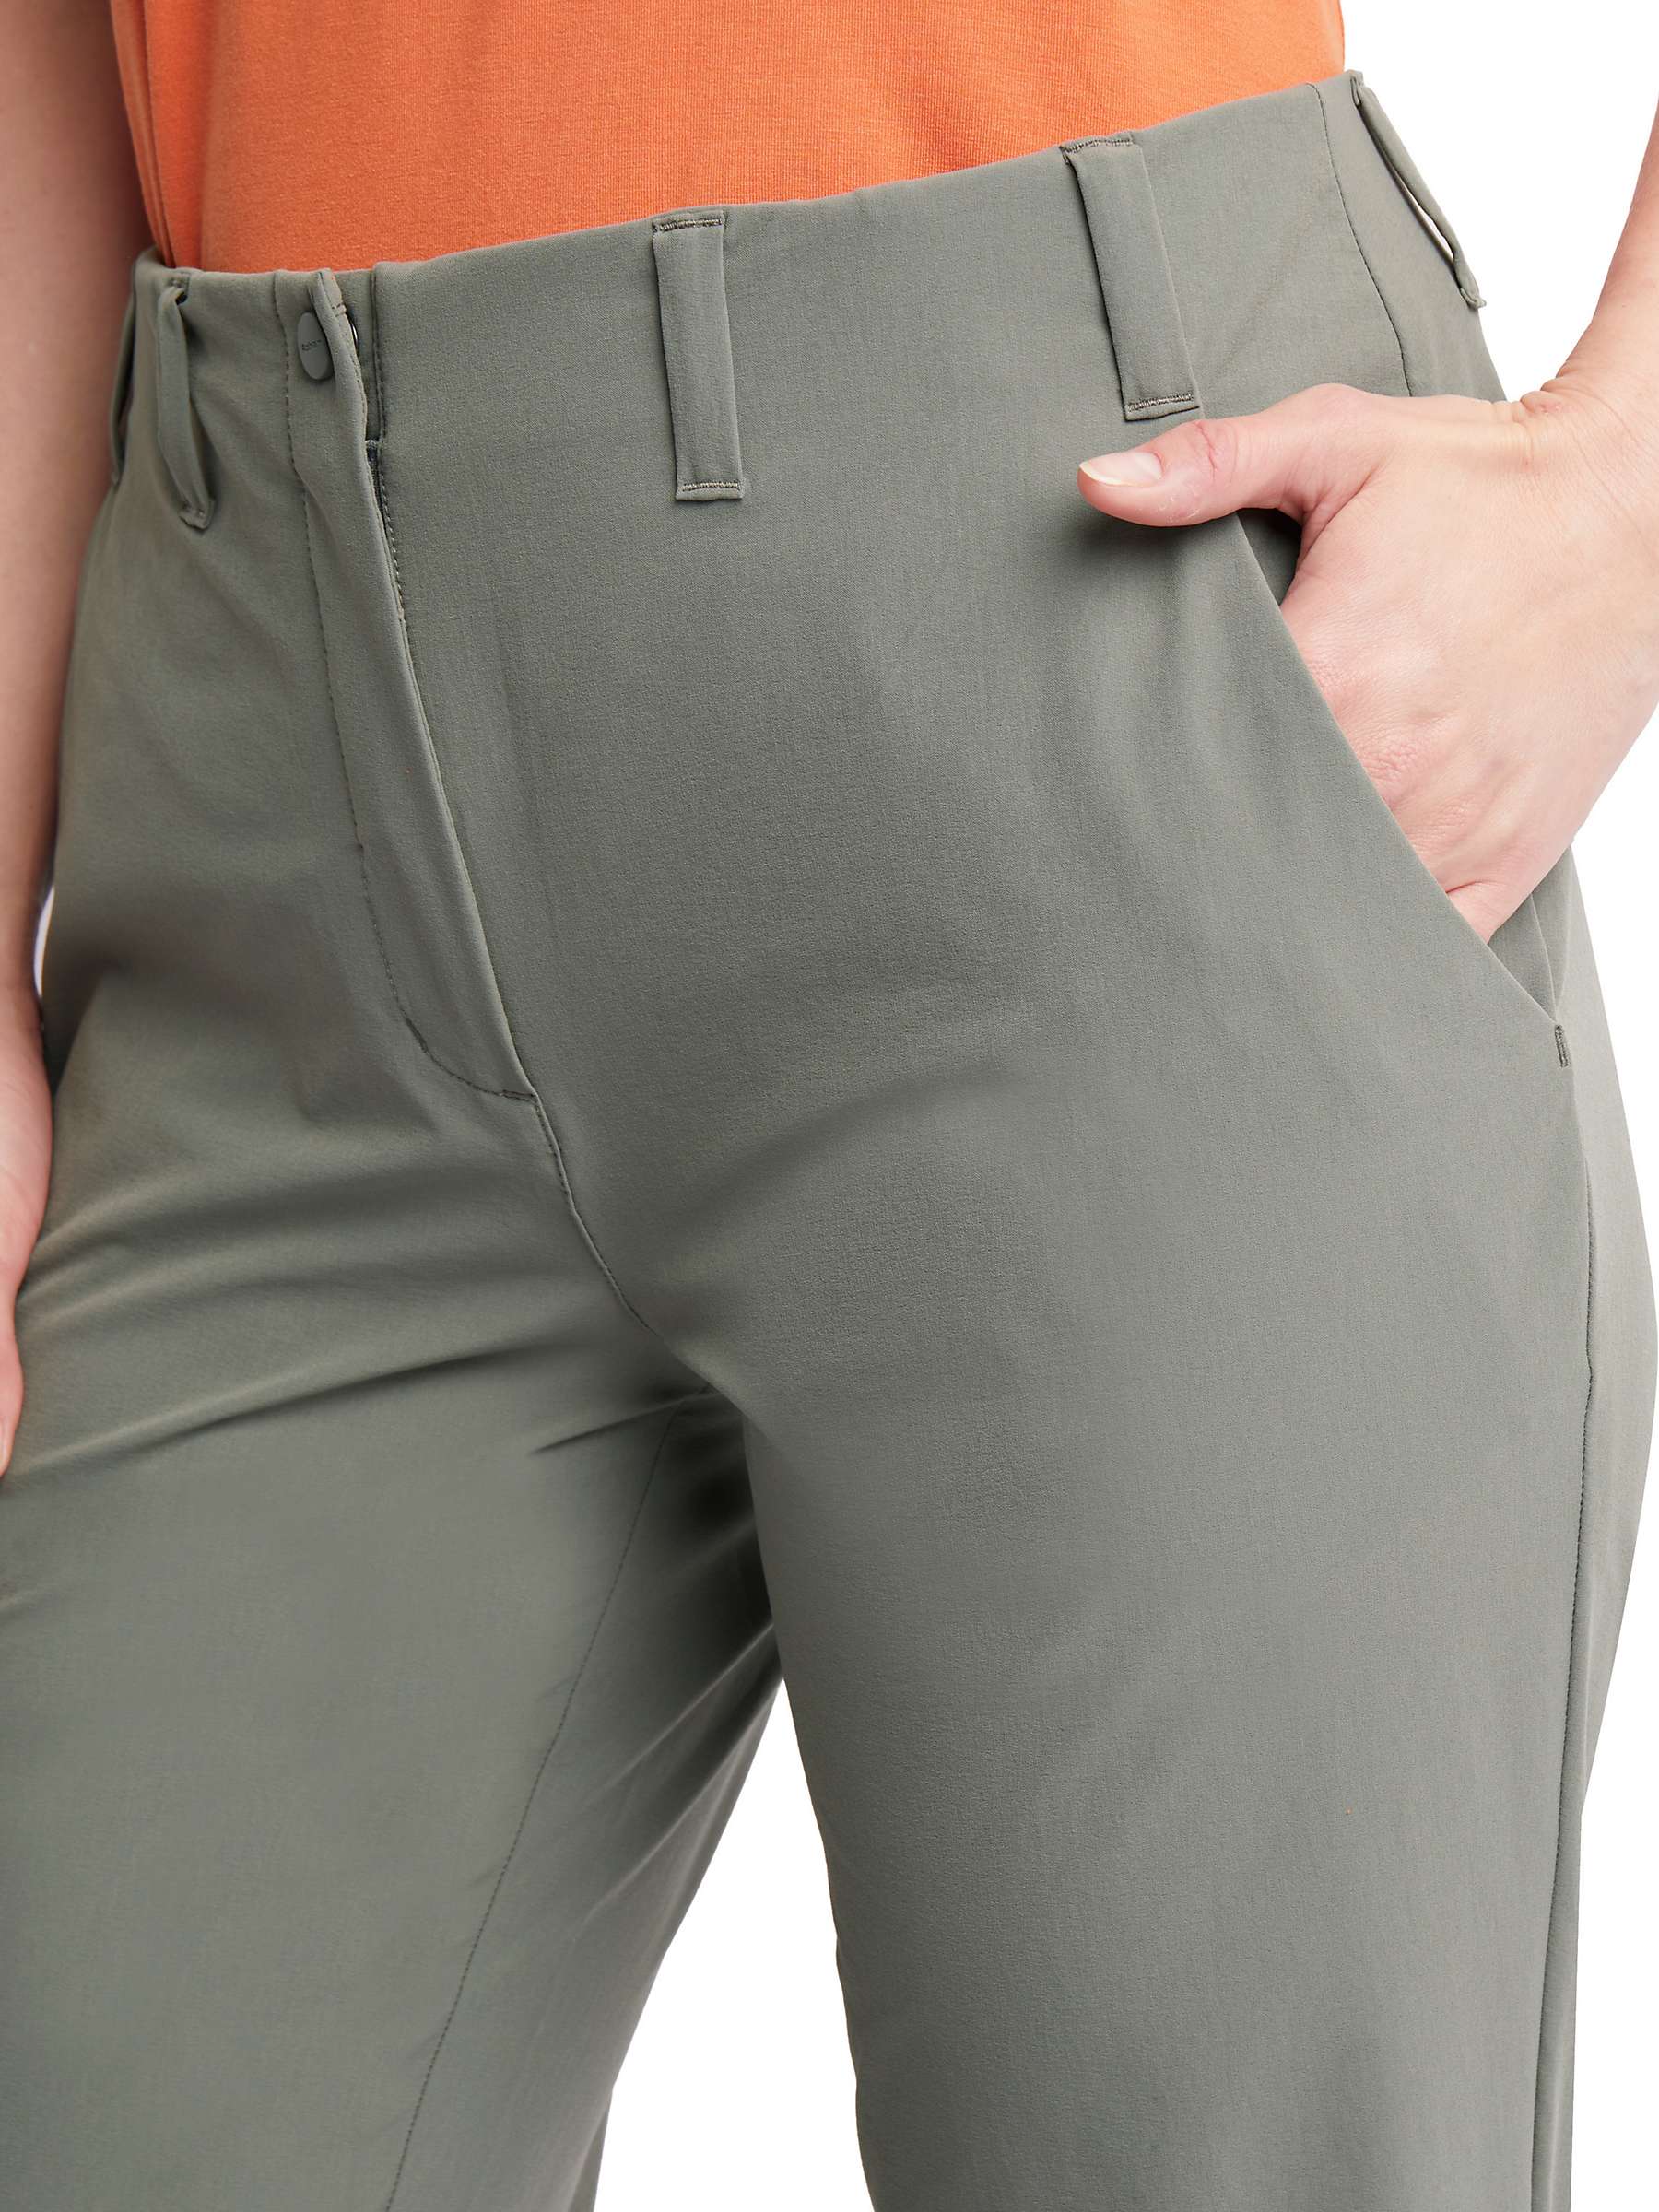 Buy Rohan Roamers Stretch Walking Trousers Online at johnlewis.com